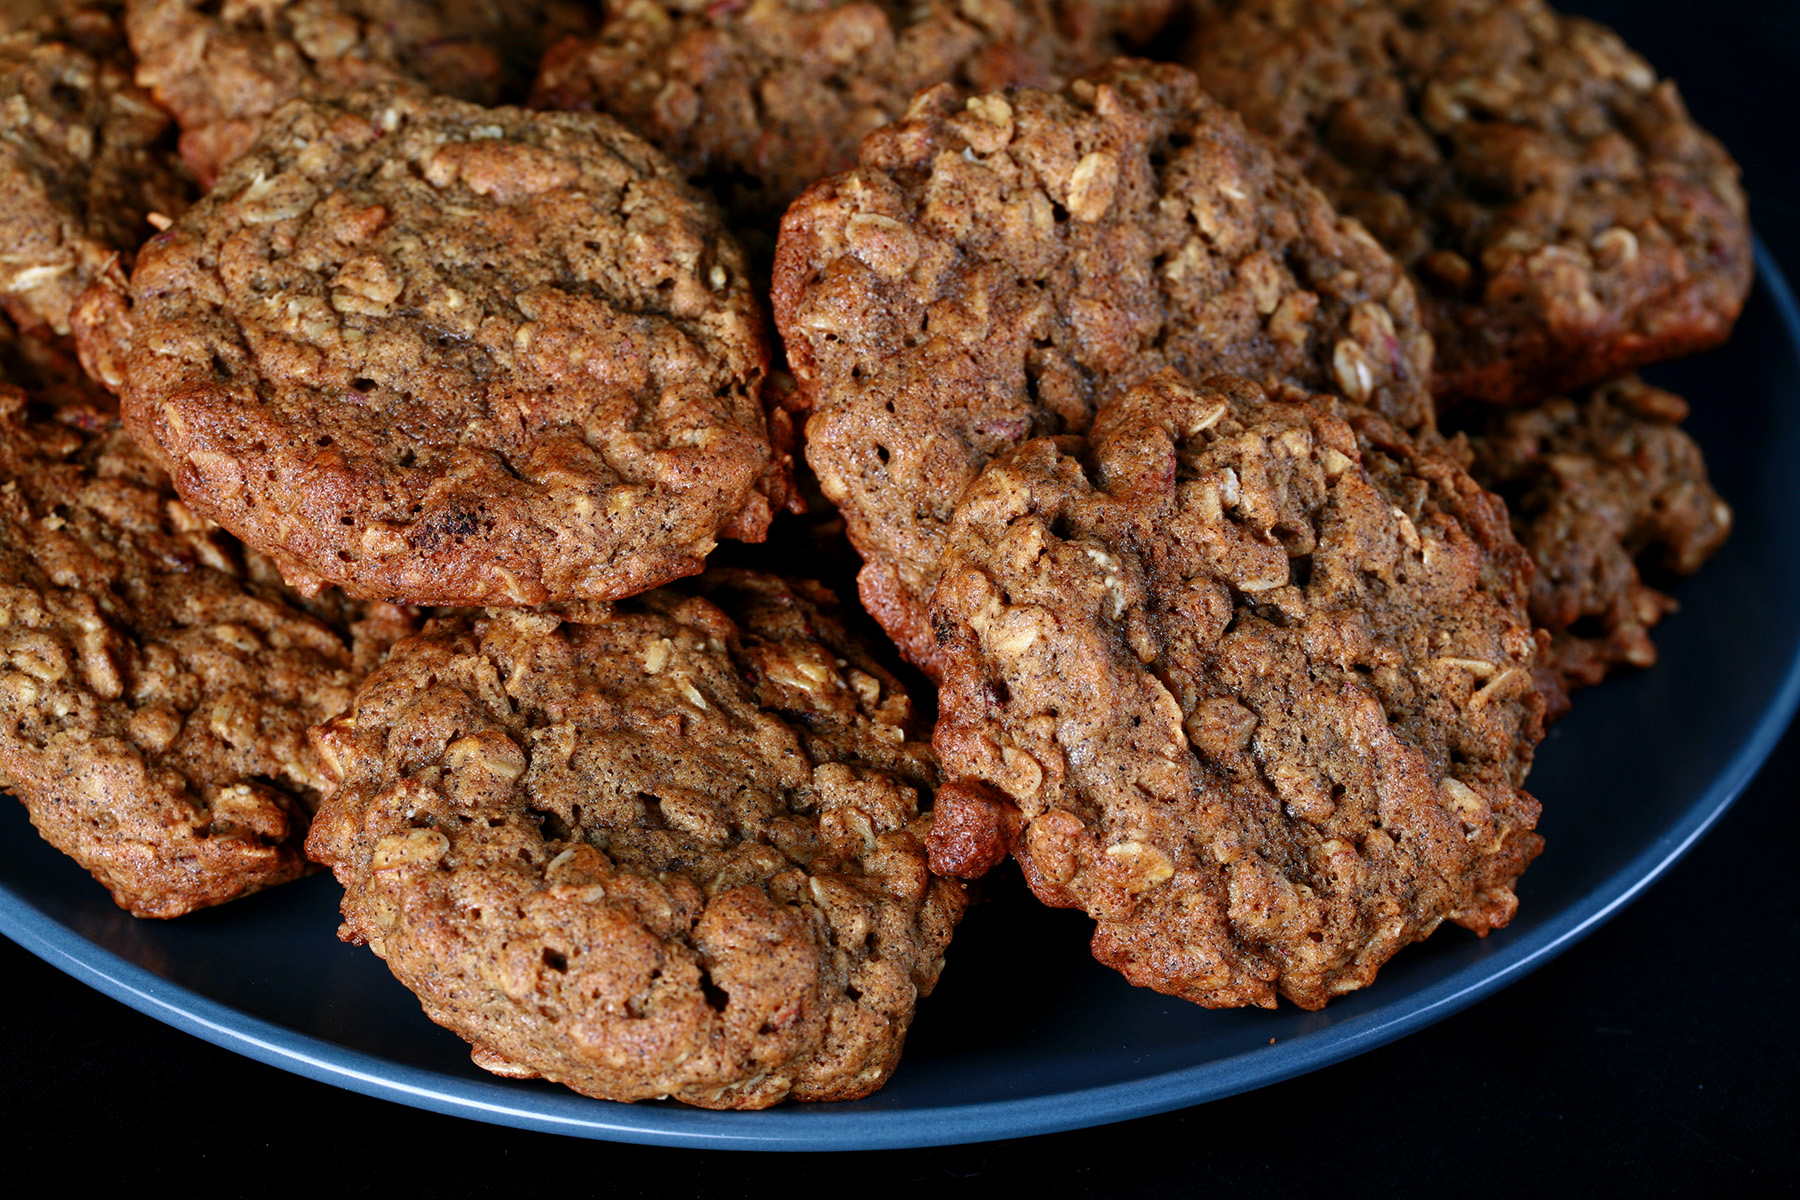 A large blue plate piled with Chewy Gluten-Free Banana Oatmeal cookies, against a black background.